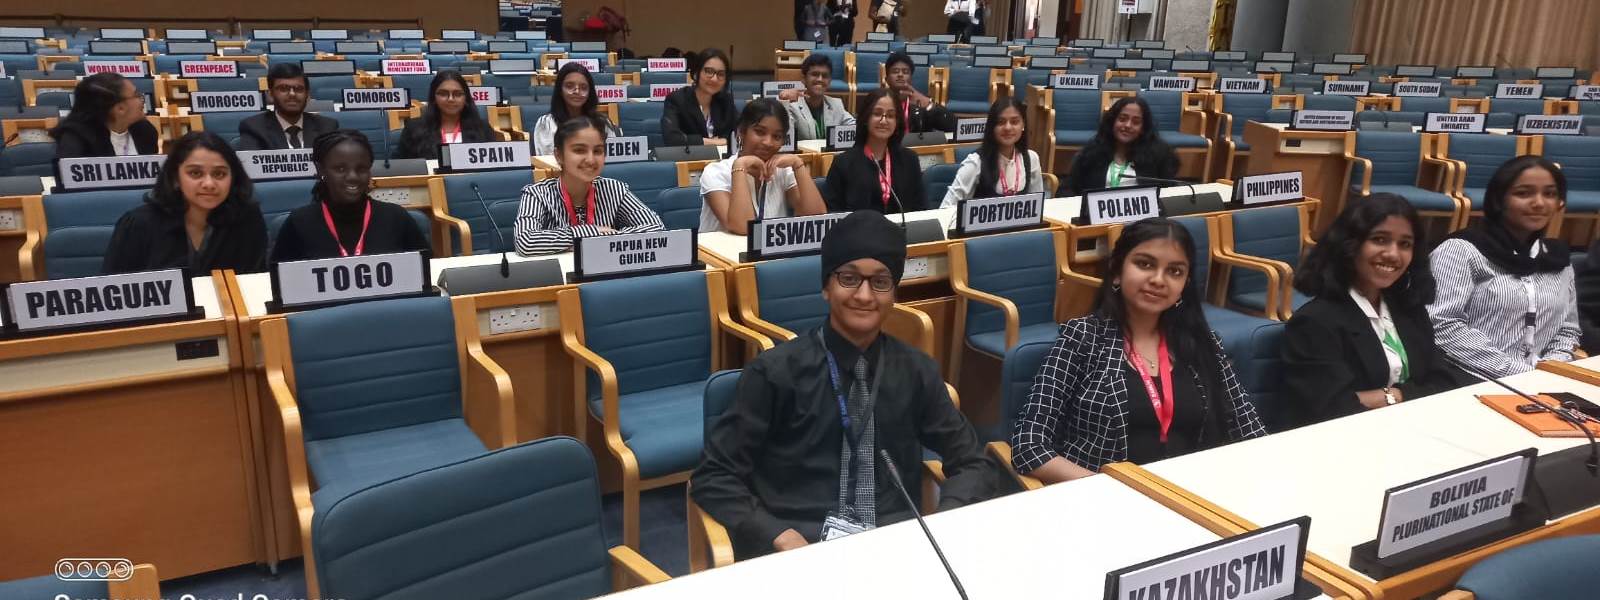 Middle School Model United Nations - 29th Interschool Conference held at UN – Headquarters, Nairobi Kenya from January 31st to February 3rd 2023